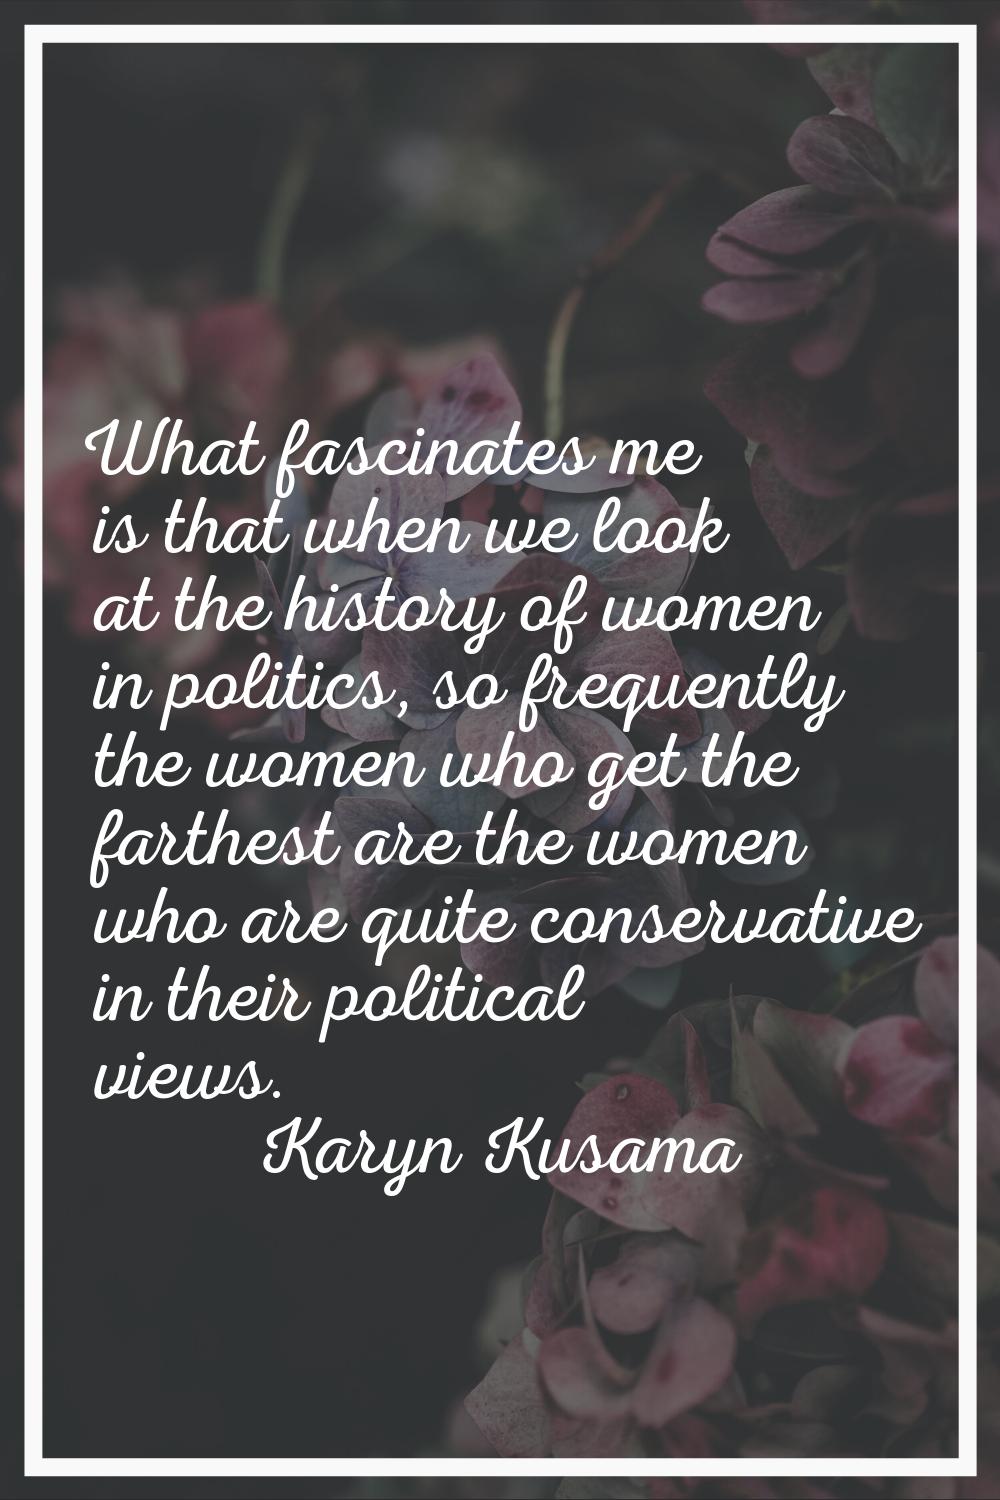 What fascinates me is that when we look at the history of women in politics, so frequently the wome